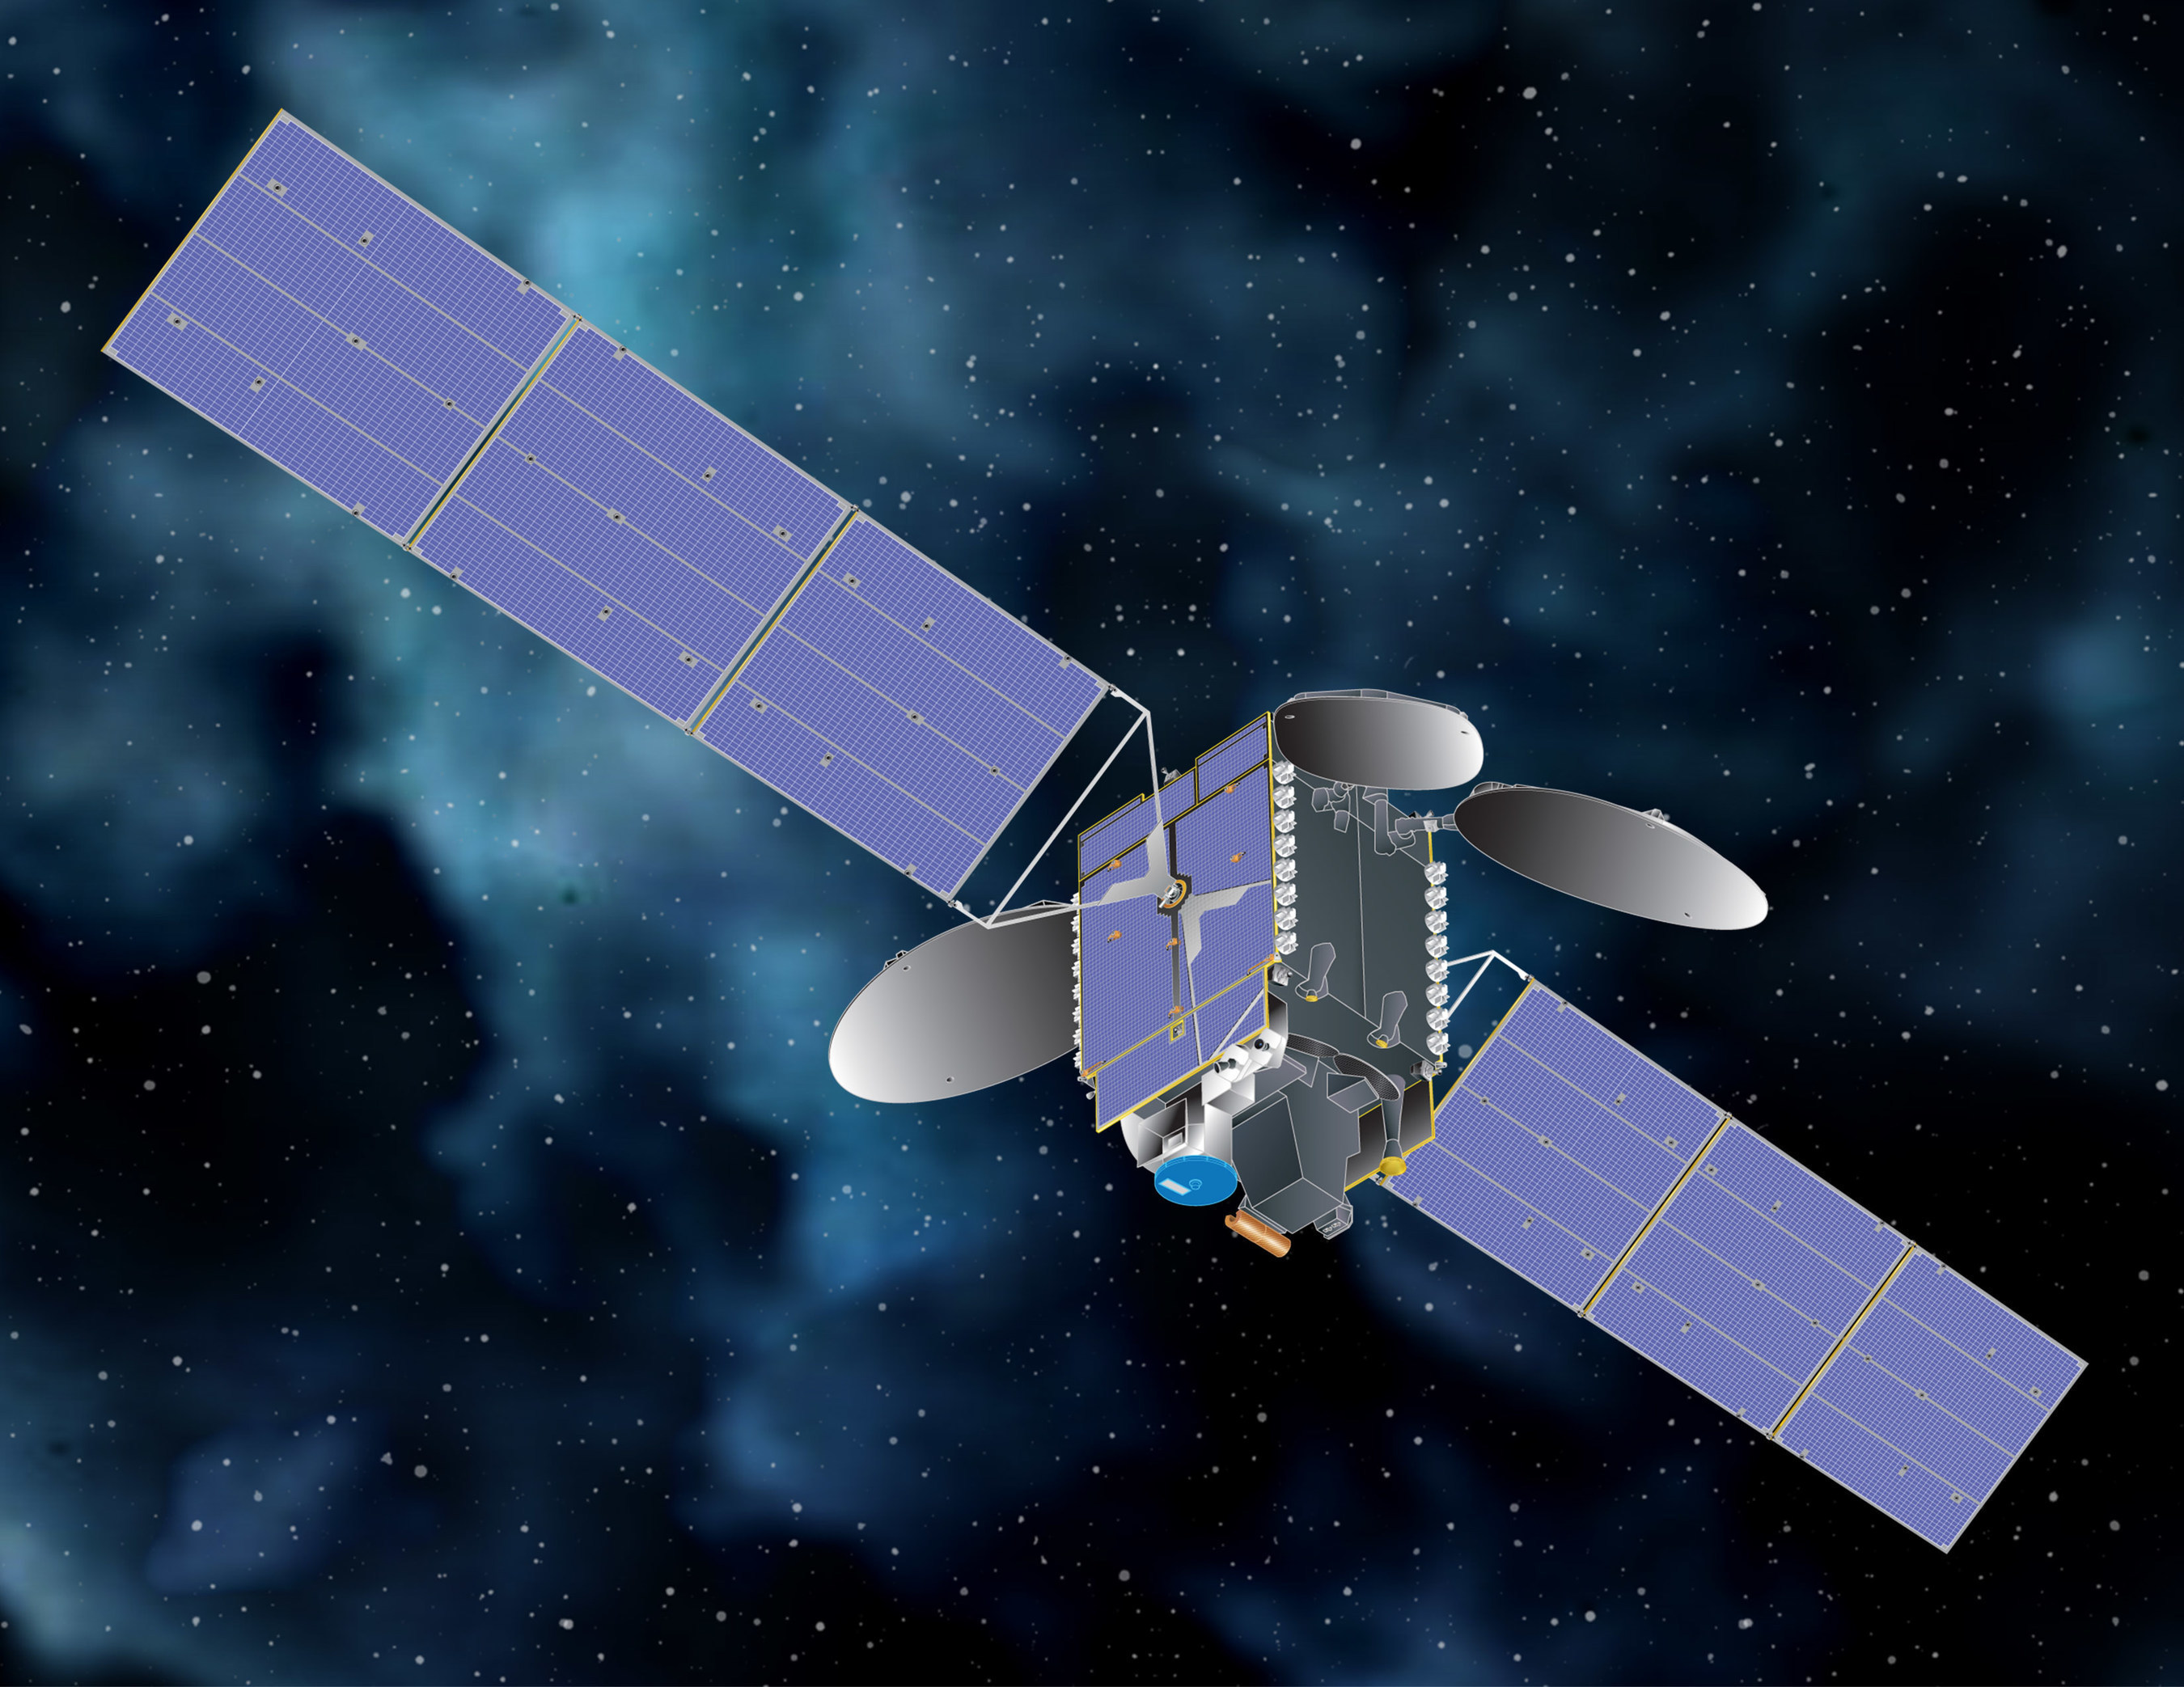 SSL concept of GEO satellite with NASA hosted payload. (PRNewsFoto/SSL)